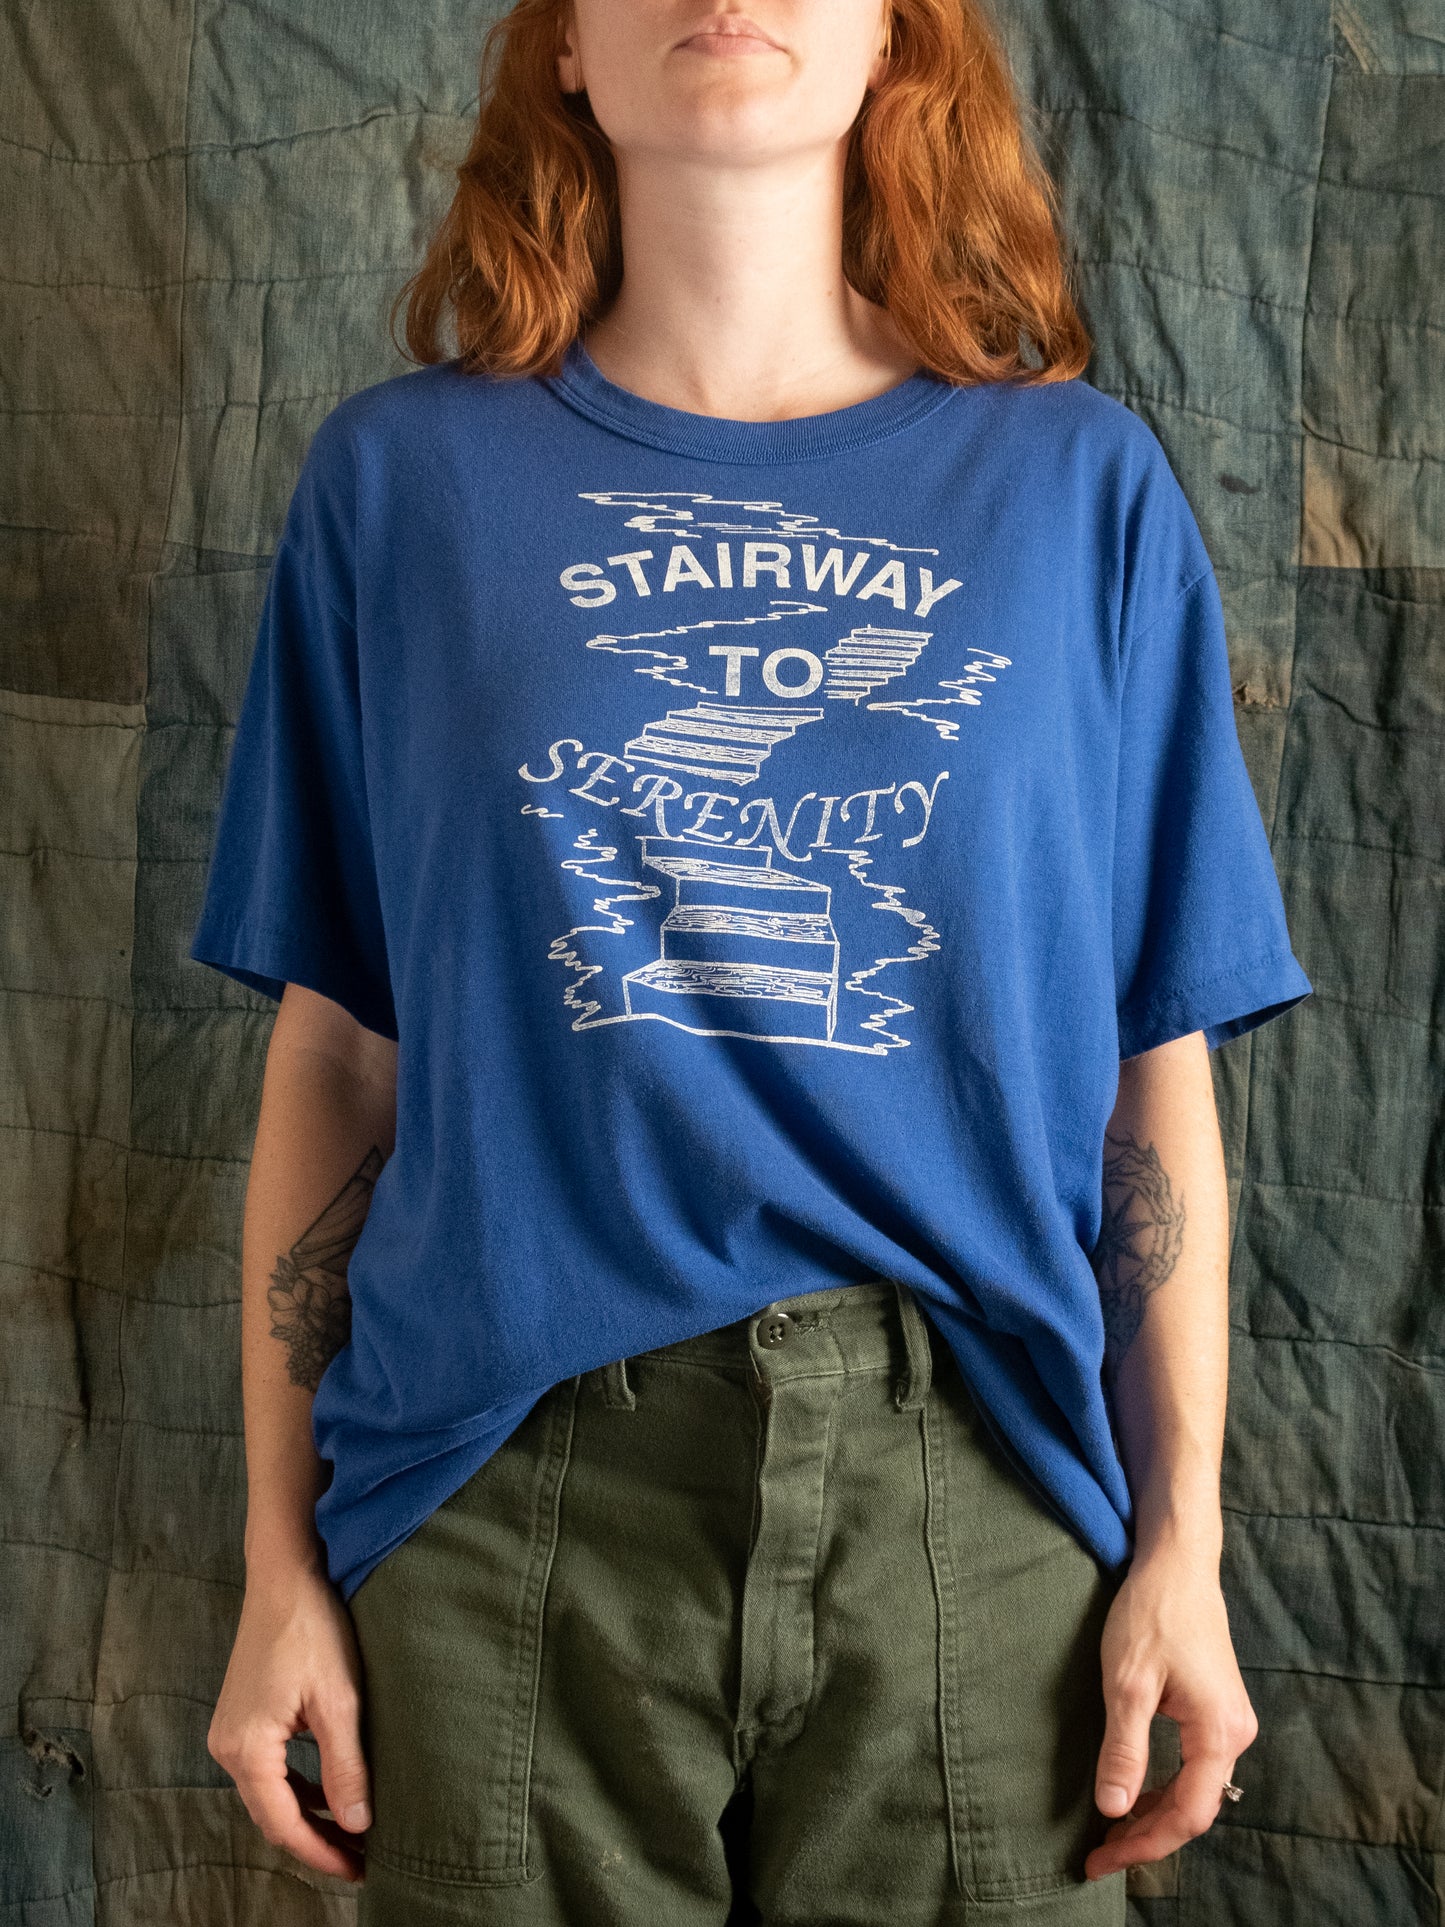 1980s Stairway To Serenity T-Shirt Size L